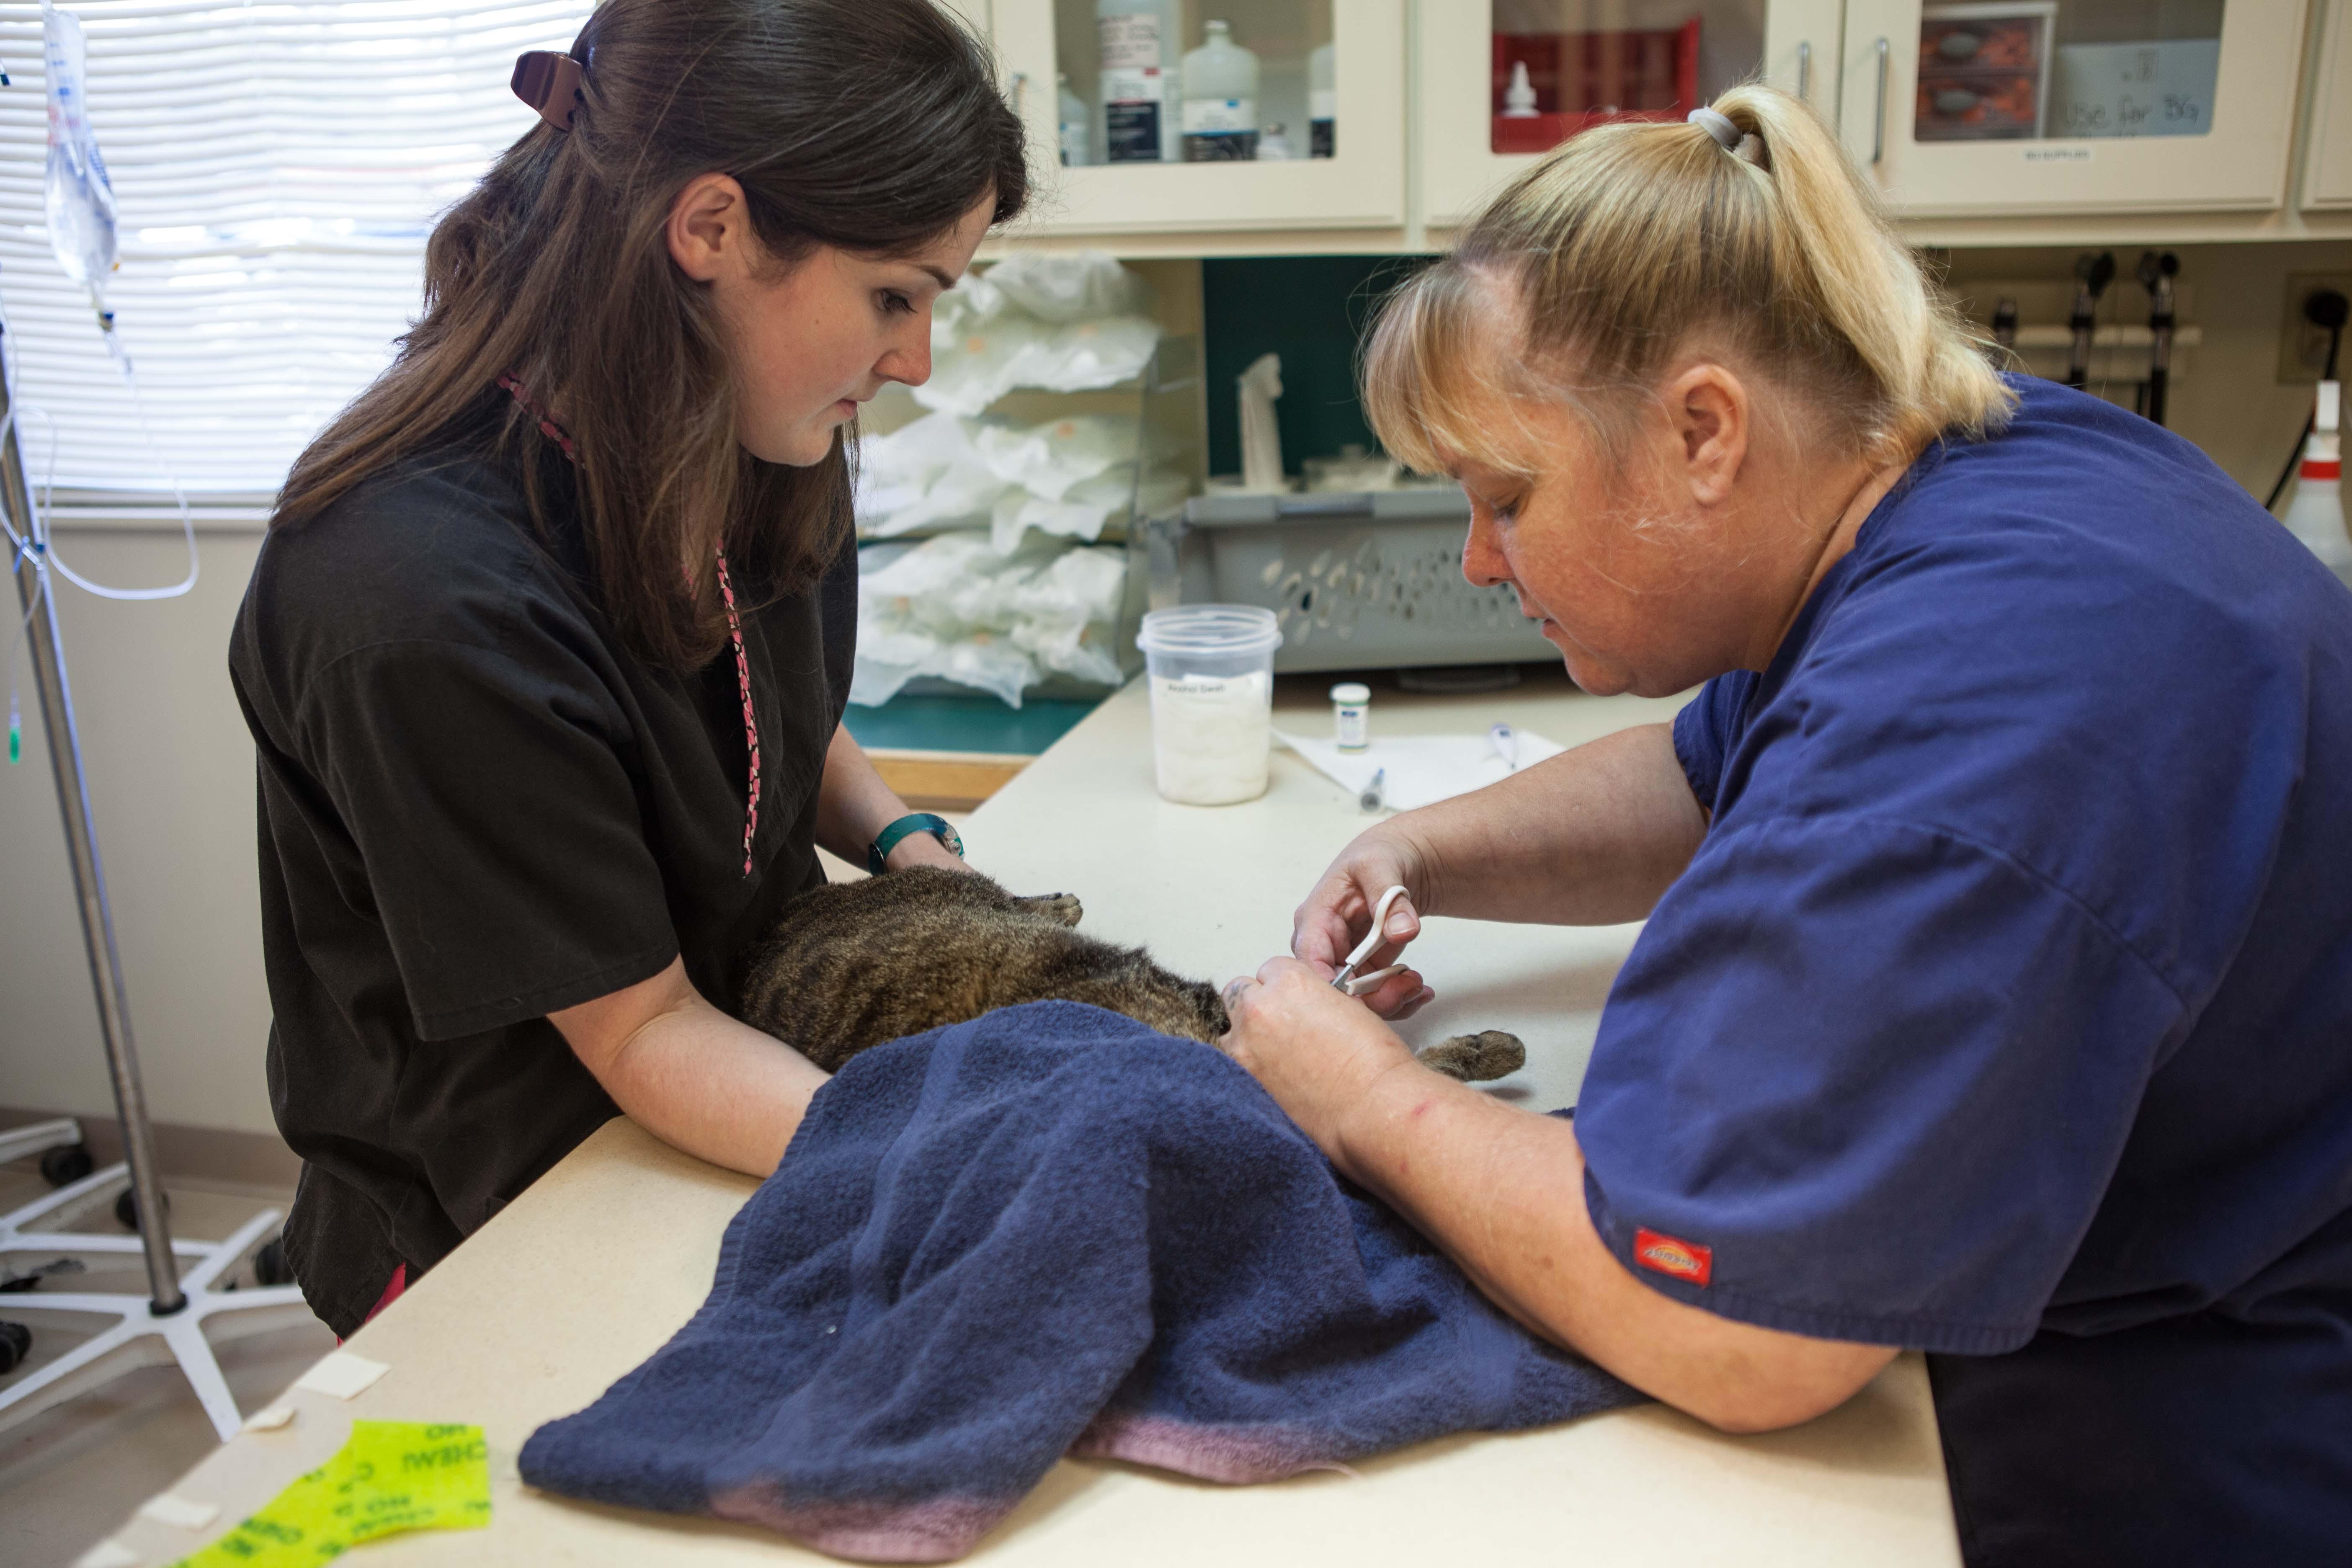 We understand that it's not always easy to cut your kitties nails, but our team is happy to help!